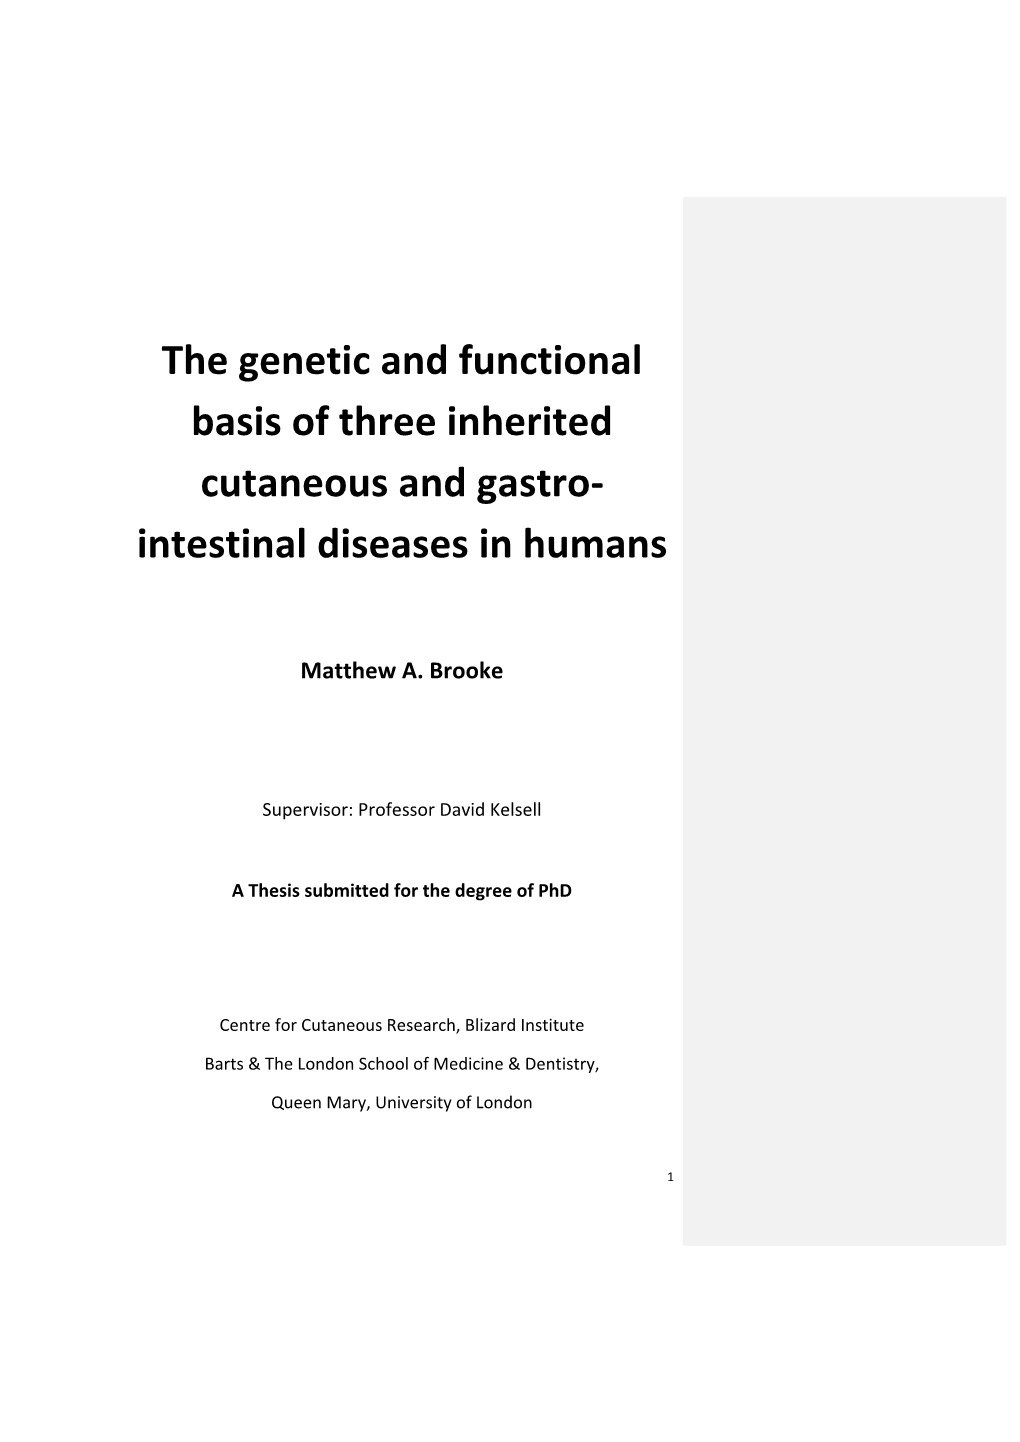 The Genetic and Functional Basis of Three Inherited Cutaneous and Gastro- Intestinal Diseases in Humans